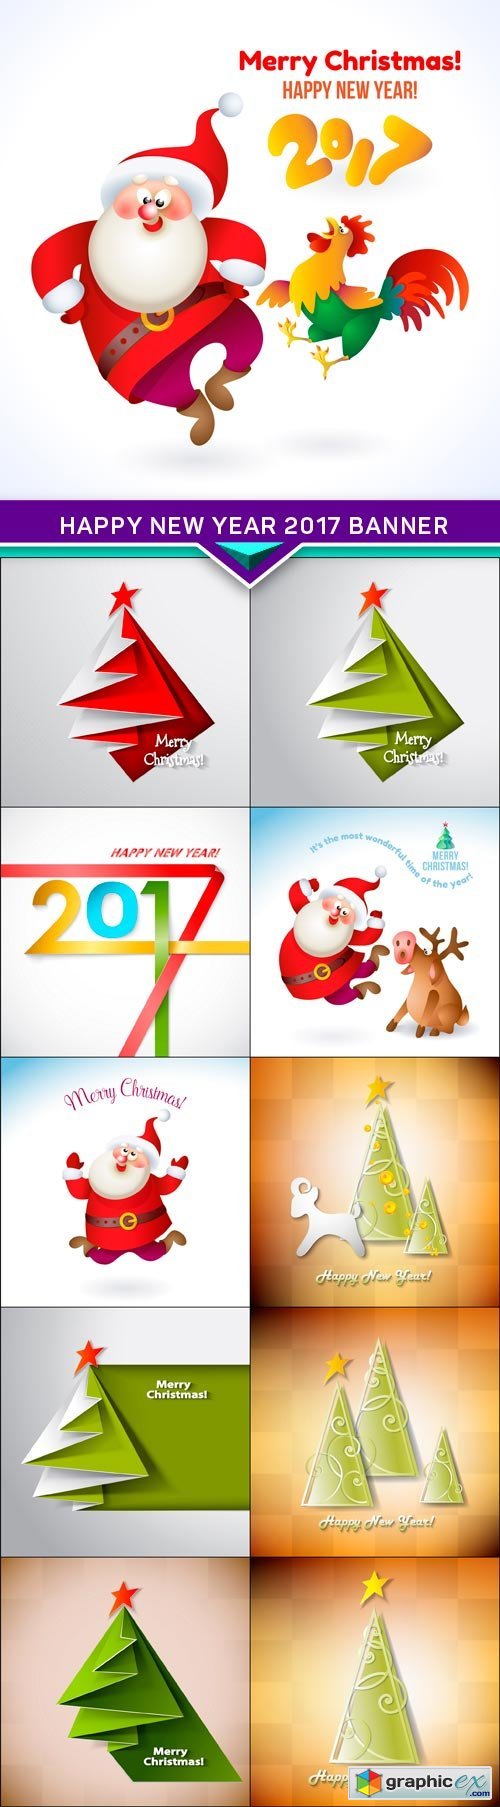 Happy New Year 2017 banner with Santa Claus and rooster 11X EPS